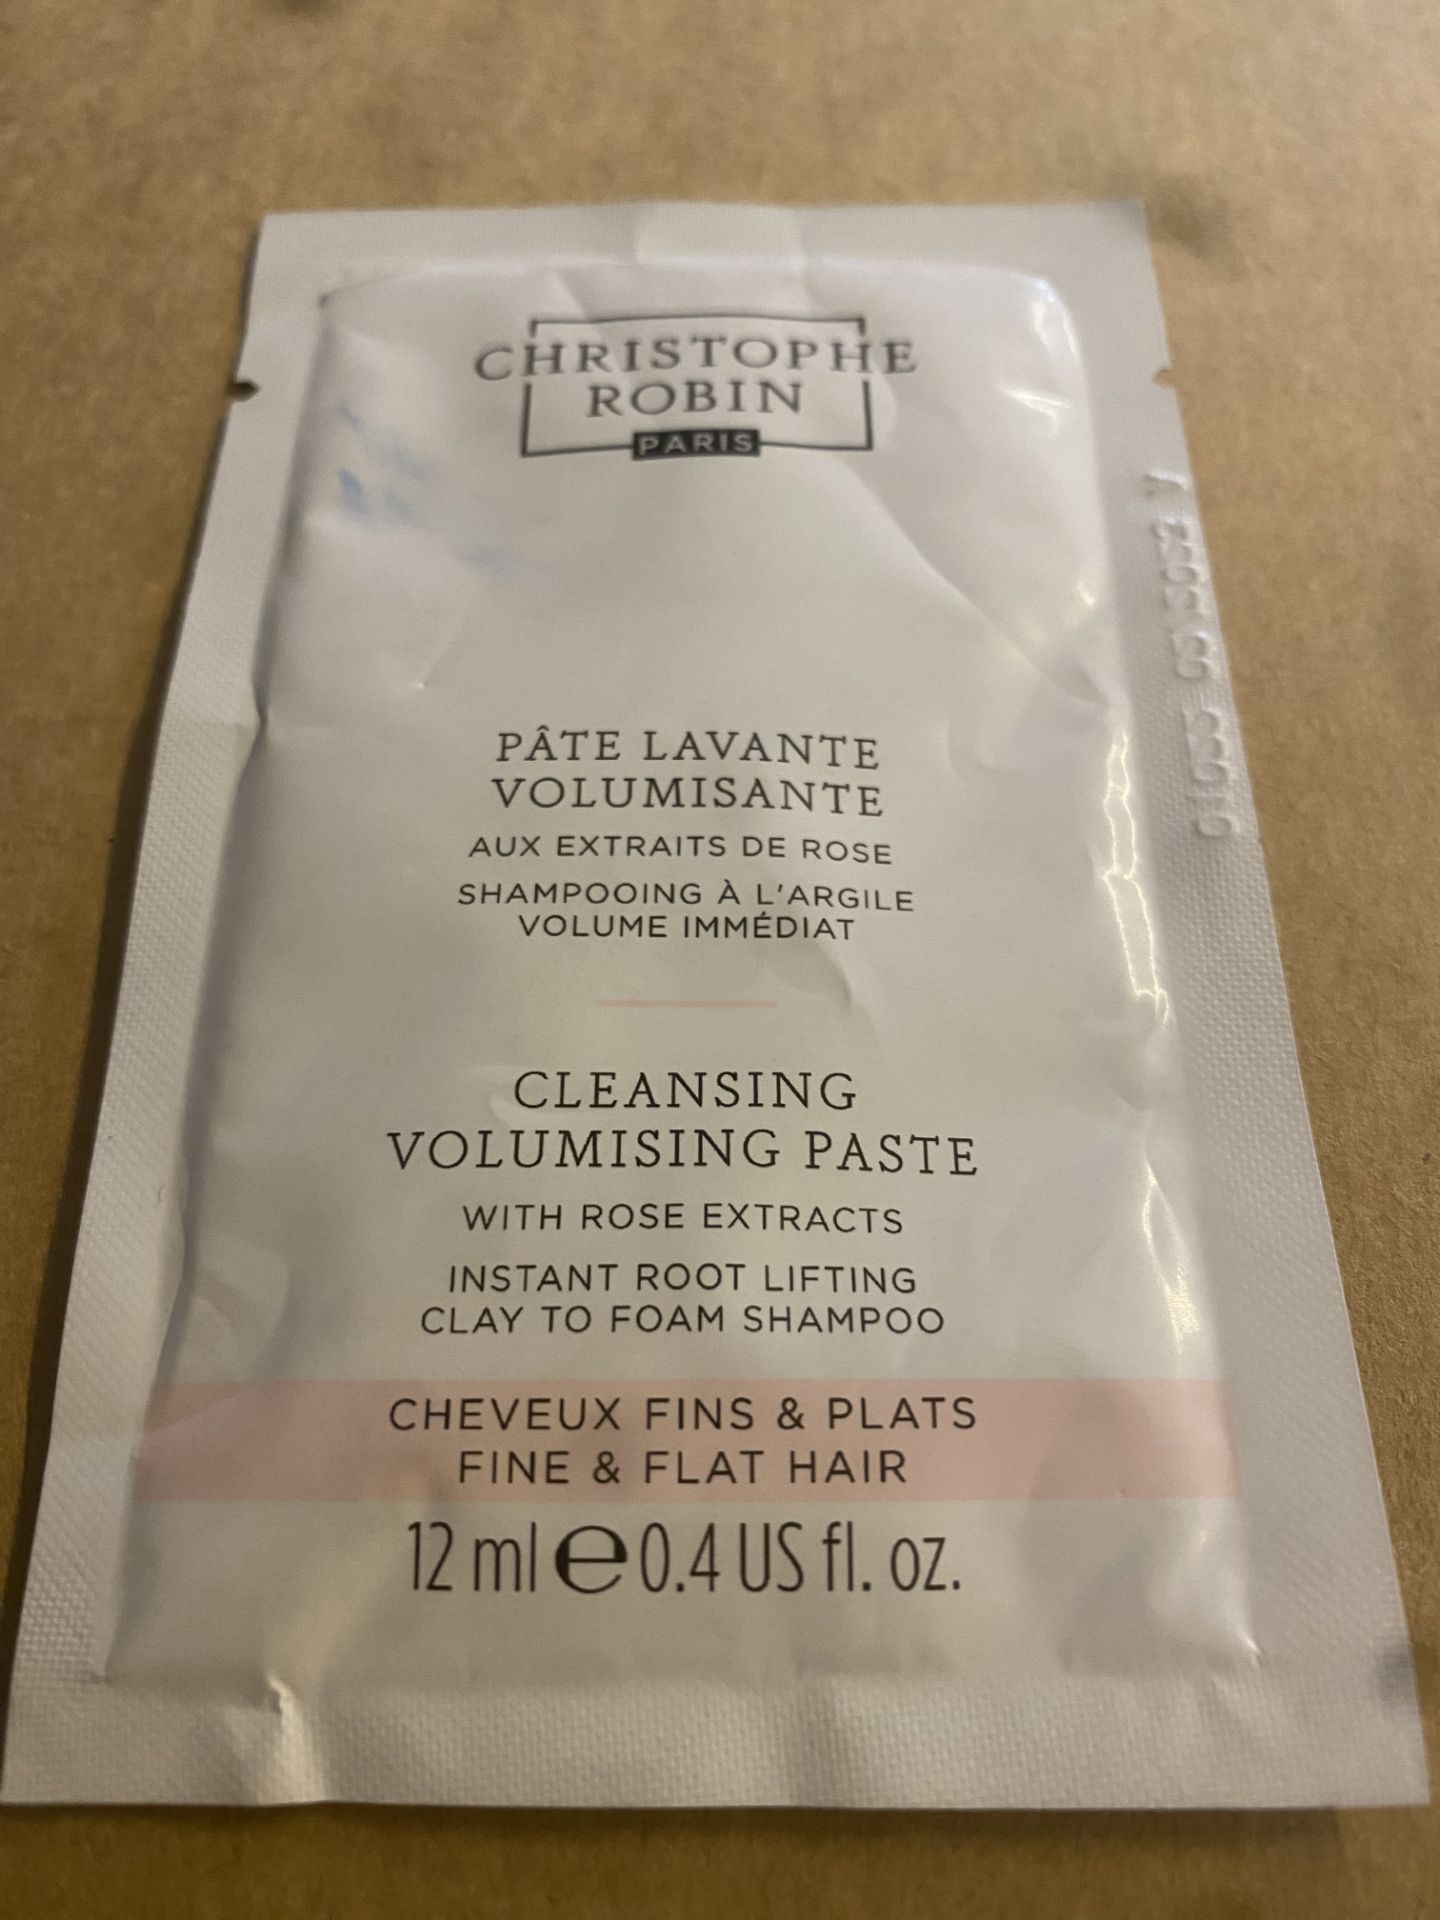 600 X CHRISTOPHE ROBIN CLEANSING VOLUMISING PASTE WITH ROSE EXTRACTS 12ML SACHET RRP1800 - Image 2 of 2